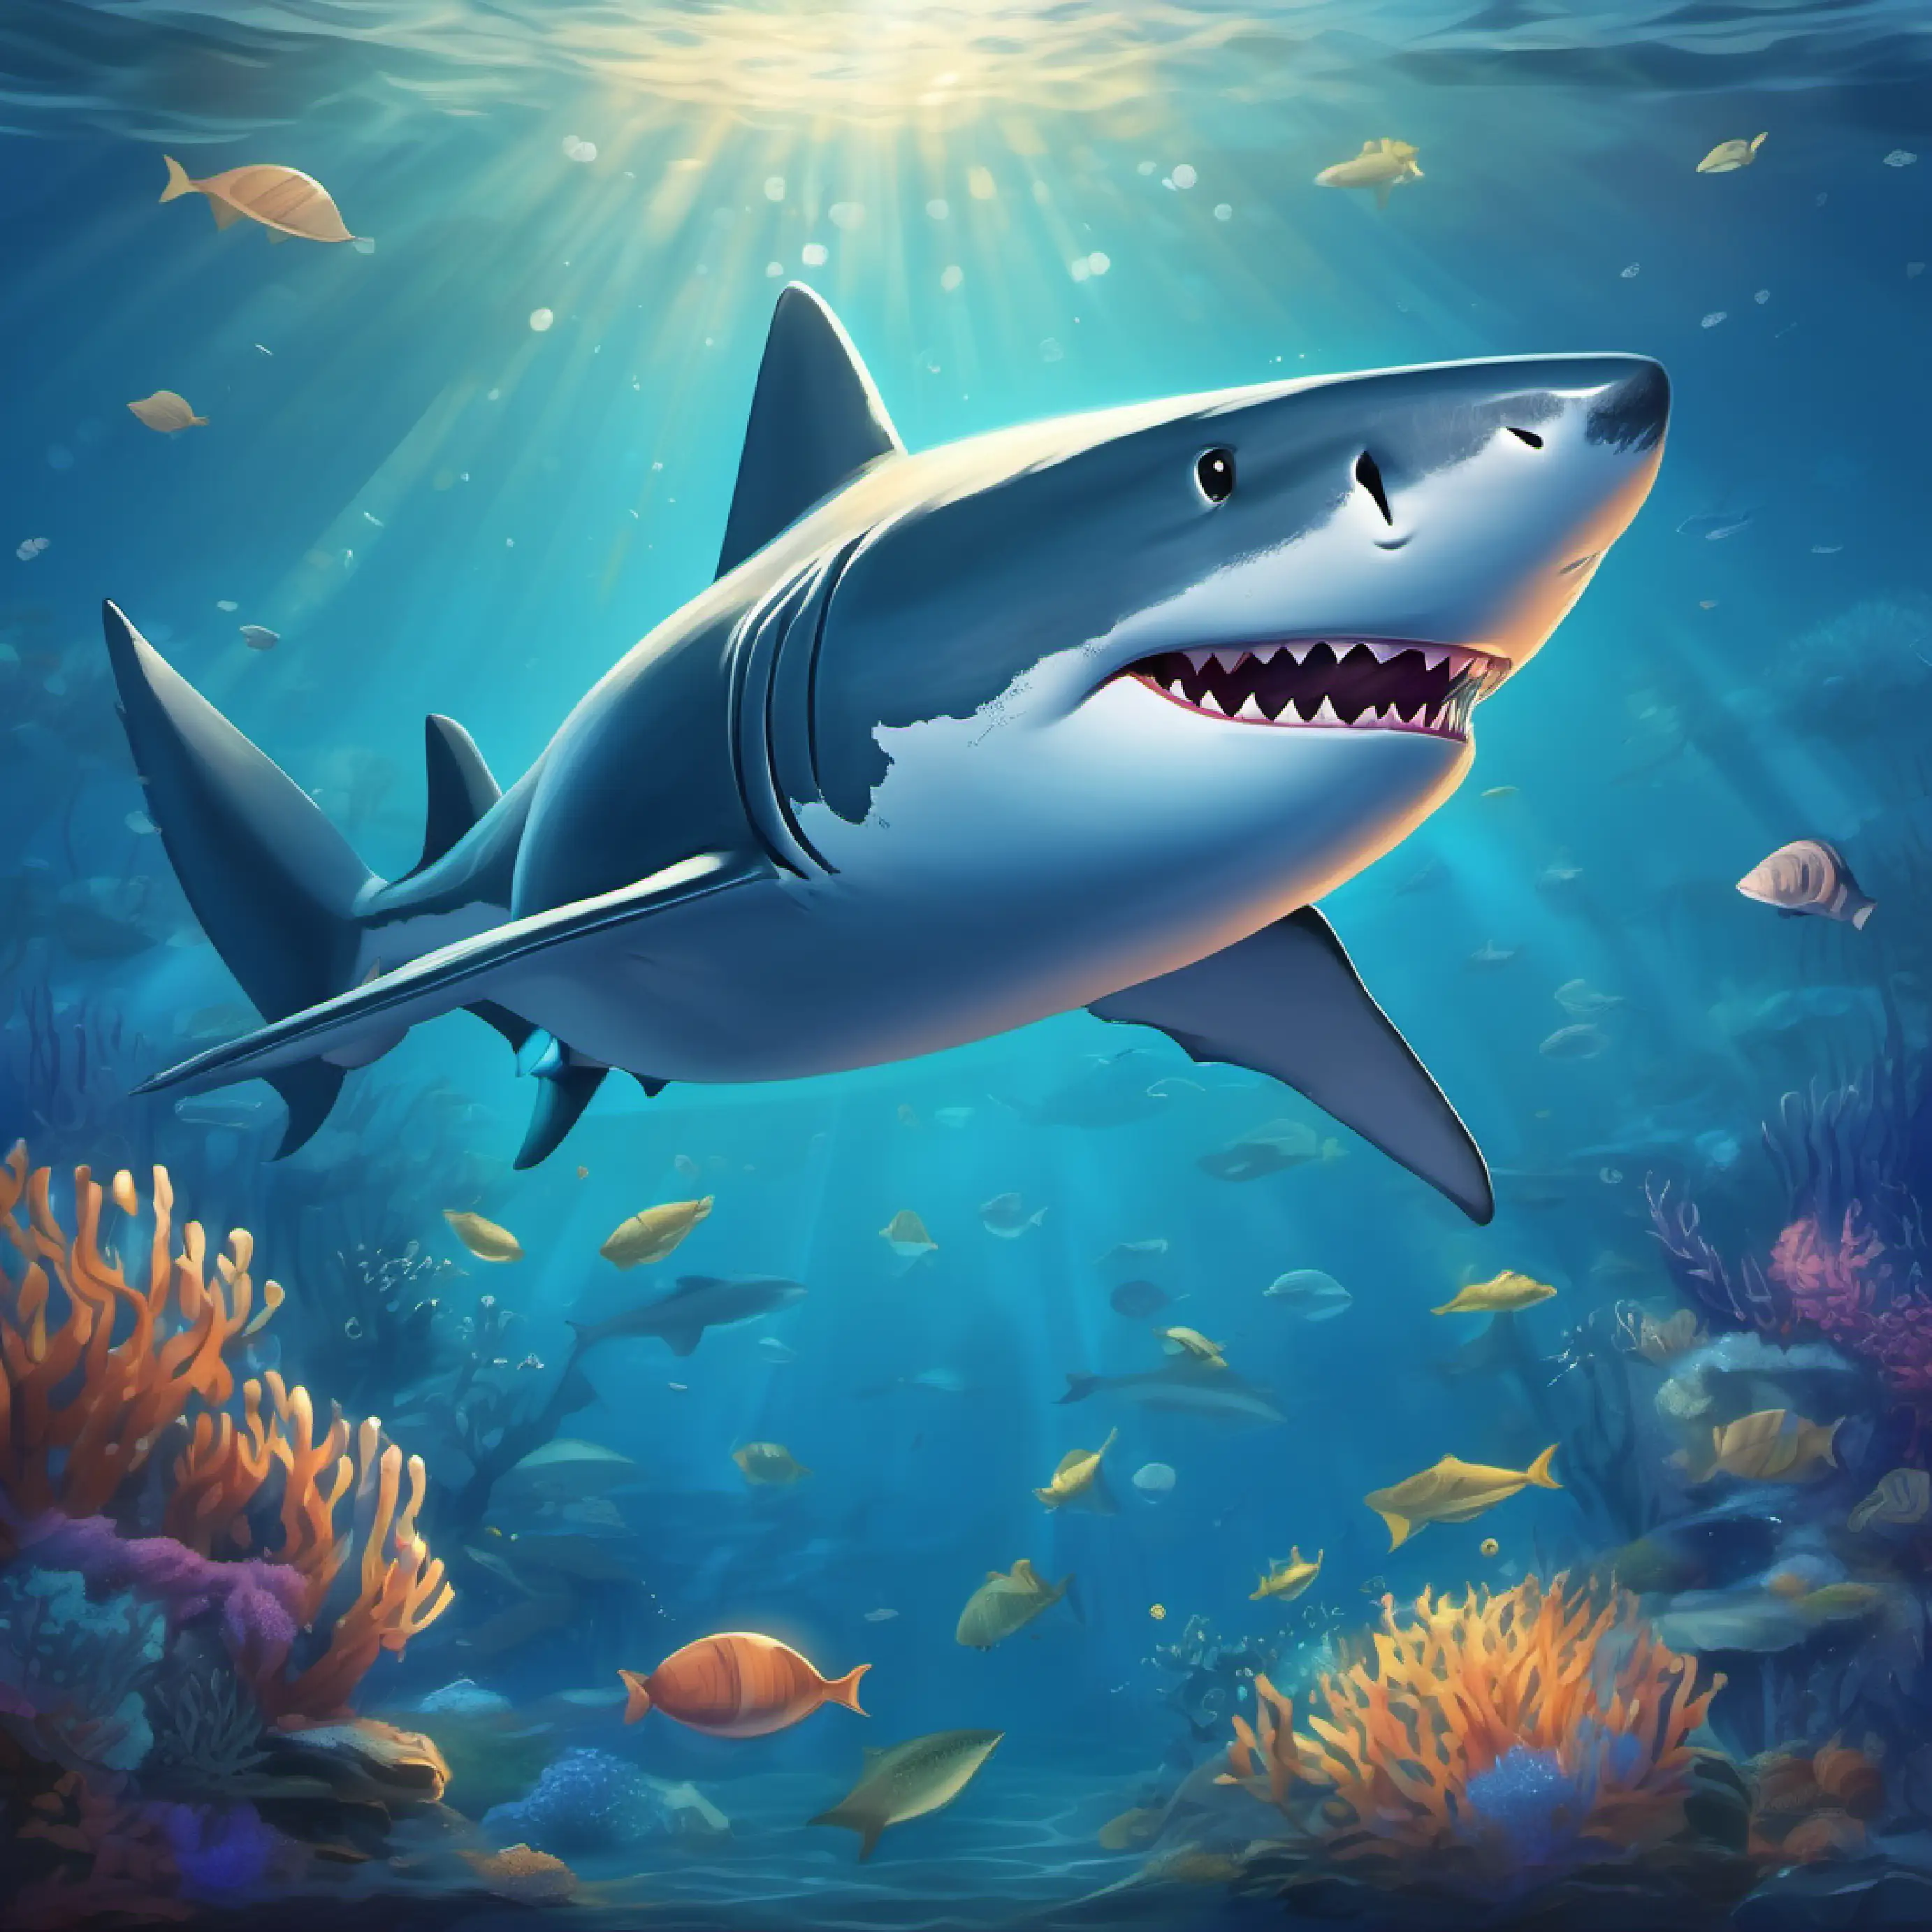 Big, friendly shark with a shiny smile Blue-gray skin, bright twinkling eyes's mission, underwater night setting, sea creatures introduction.